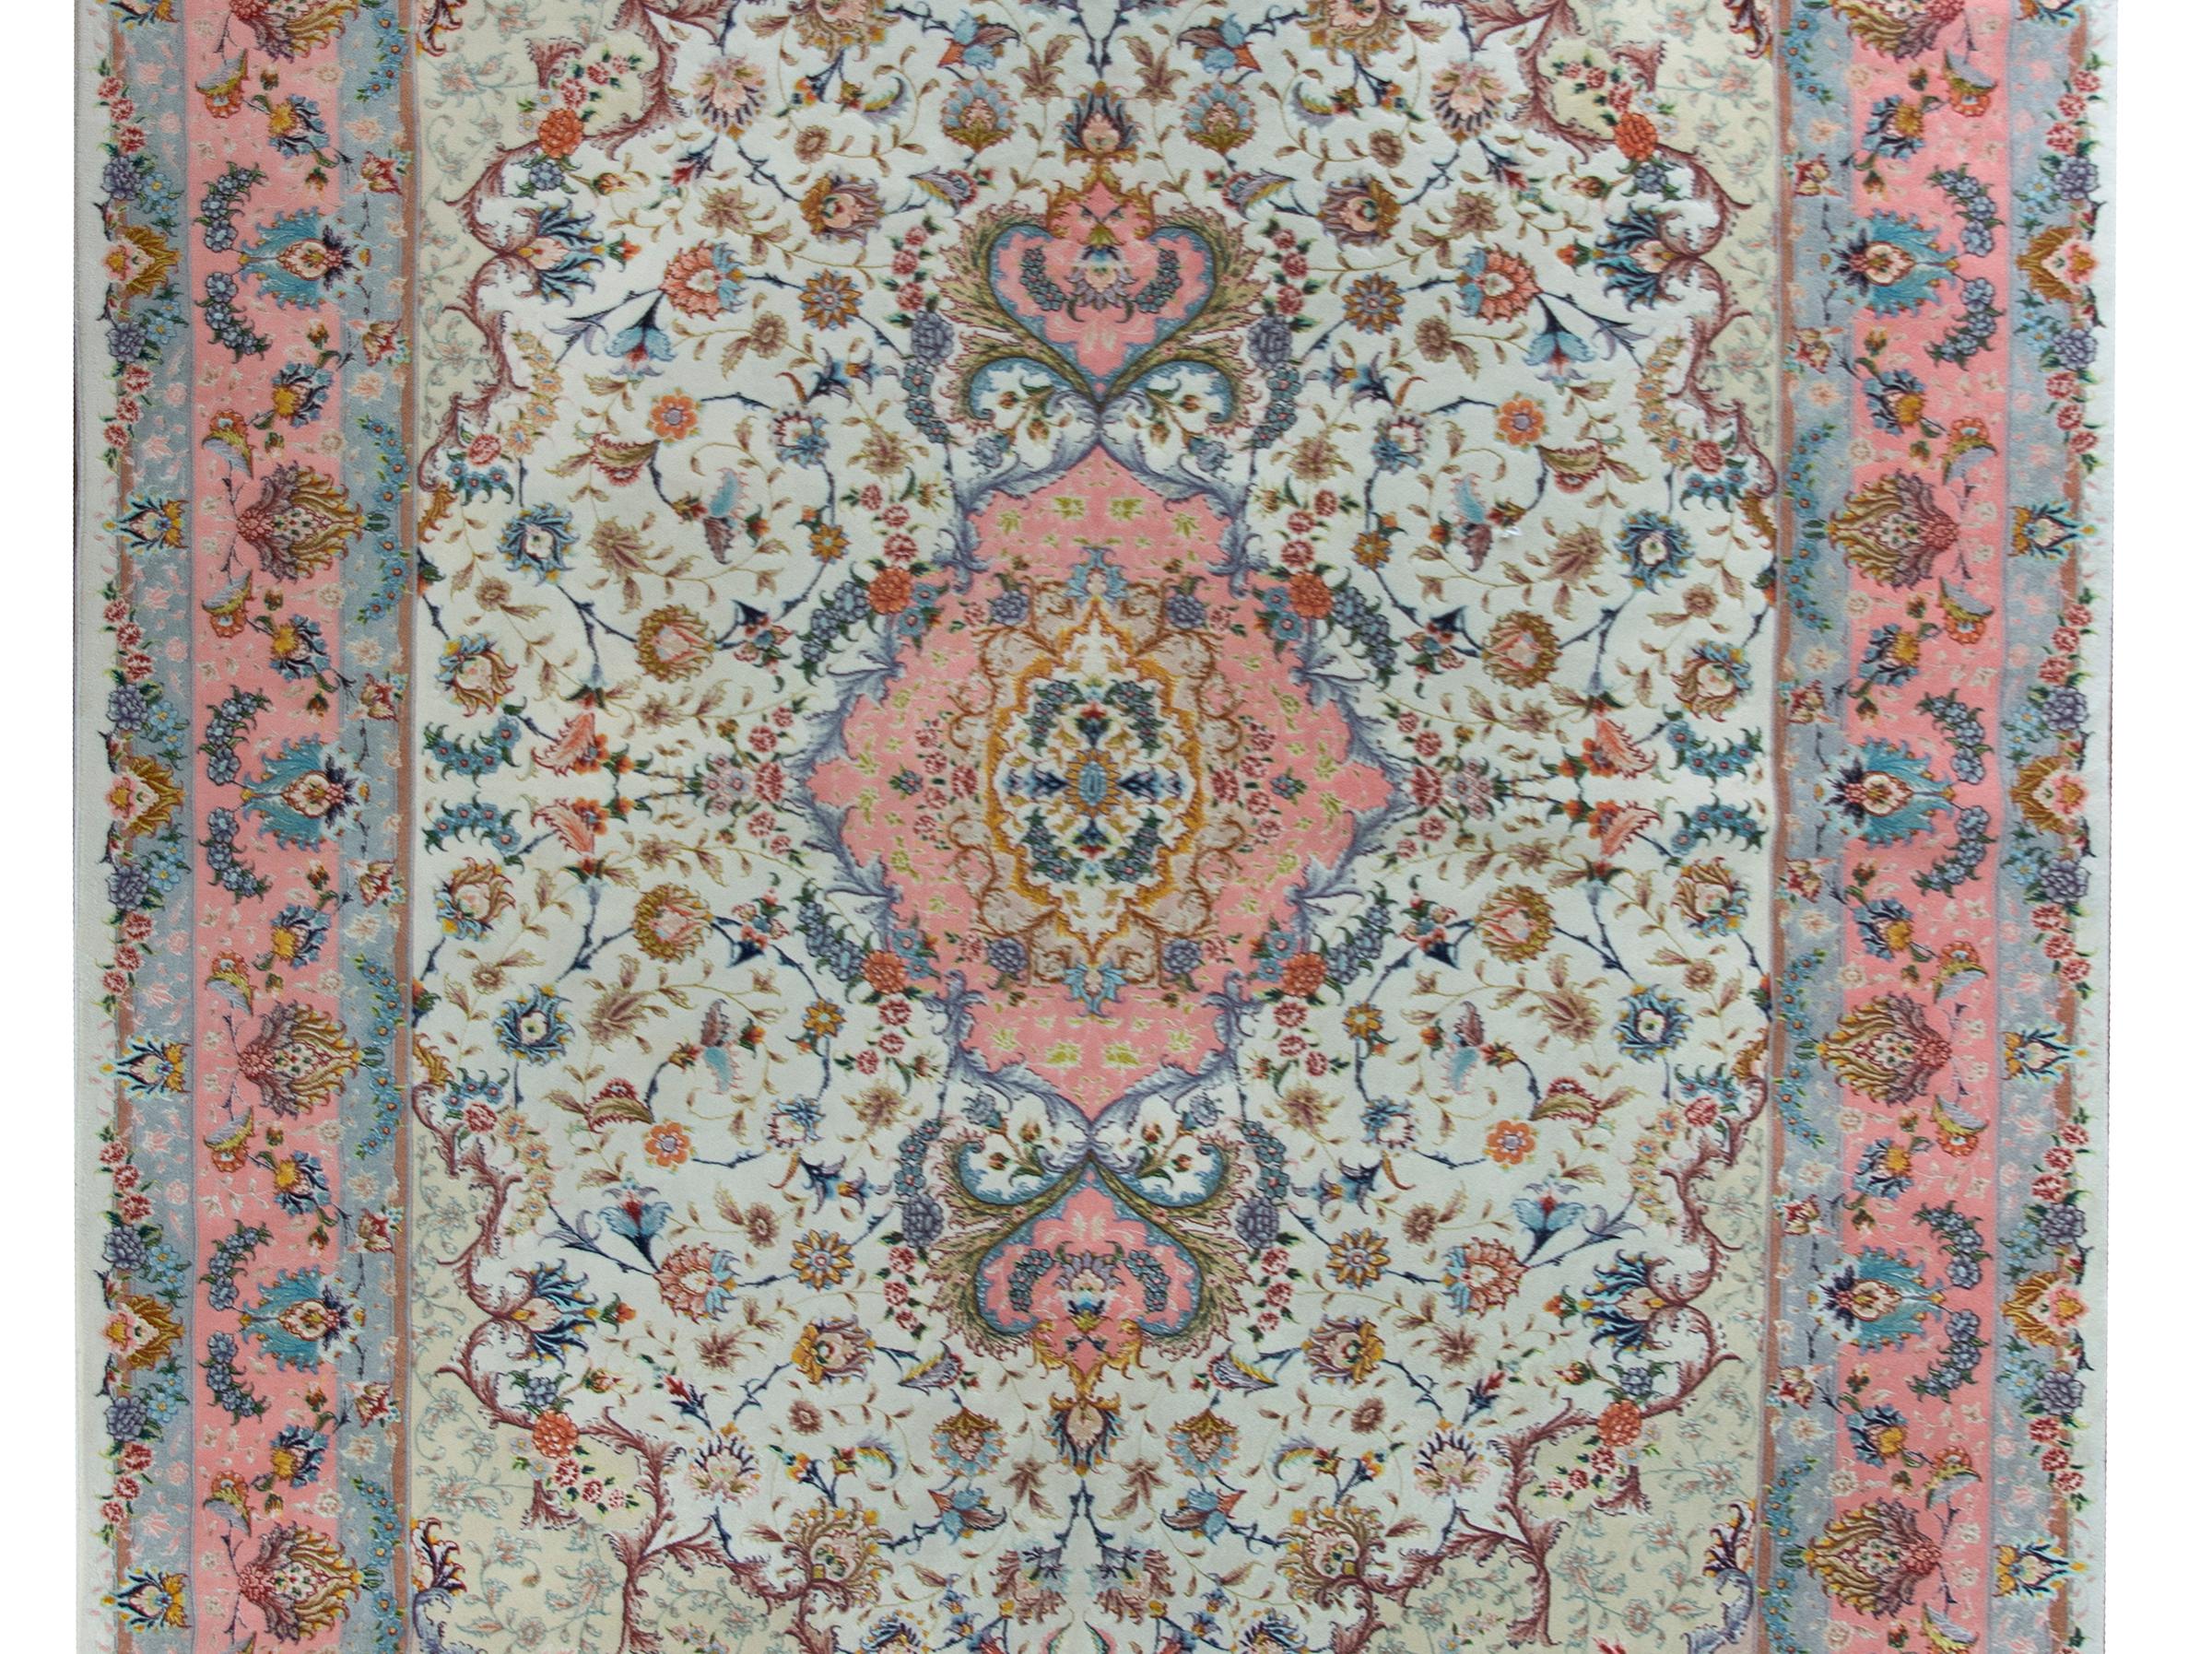 A remarkable late 20th century Persian Tabriz hand-knotted silk and wool rug with a mesmerizing pattern with a central medallion living amidst a finely rendered field of scrolling vines and flowers, and surrounded by a wide large-scale repeated